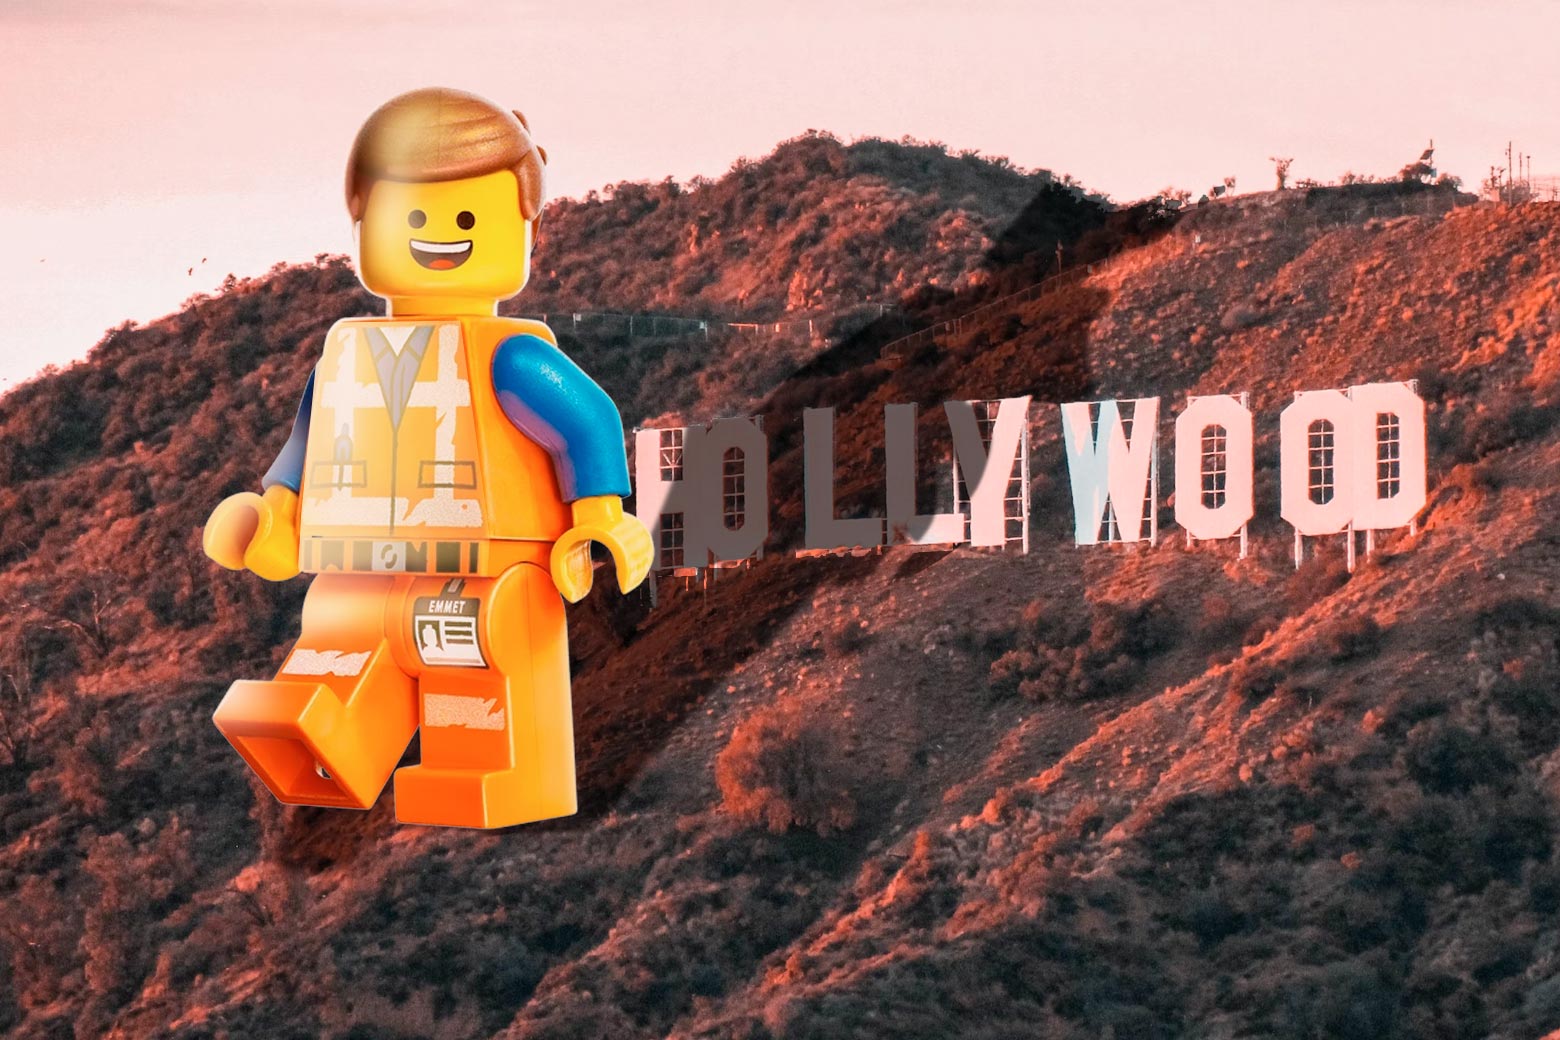 The Lego Movie: There would be no Barbie—or backlash over those